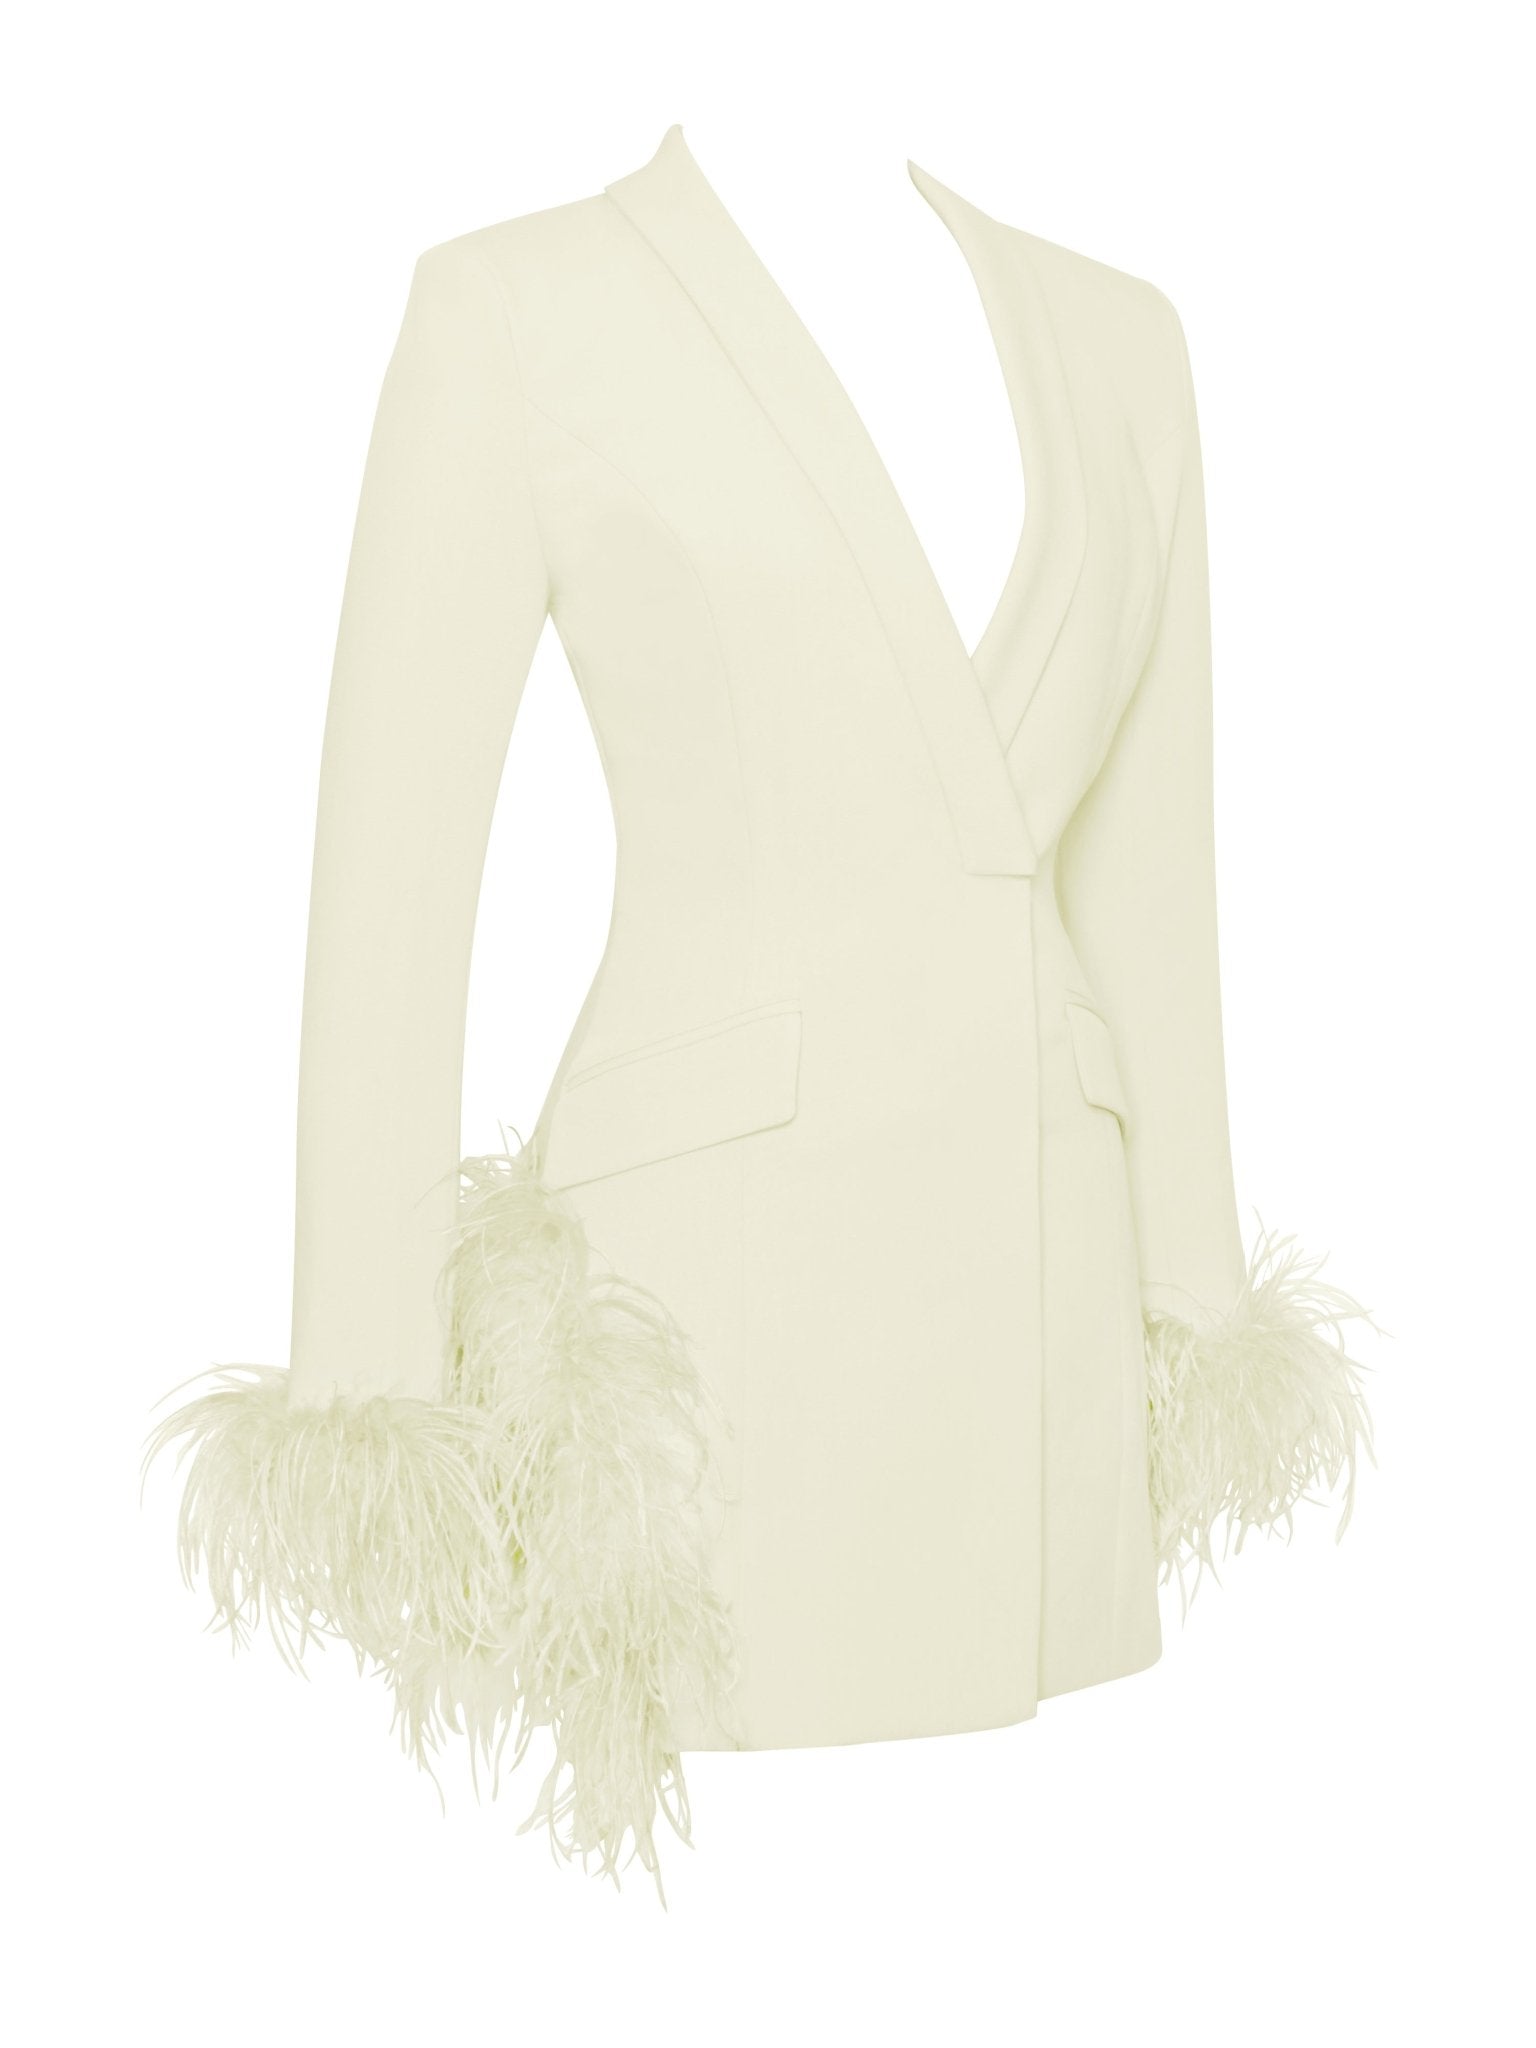 Madeline Pearl White Feather Trim Blazer Dress - HOUSE OF SHE